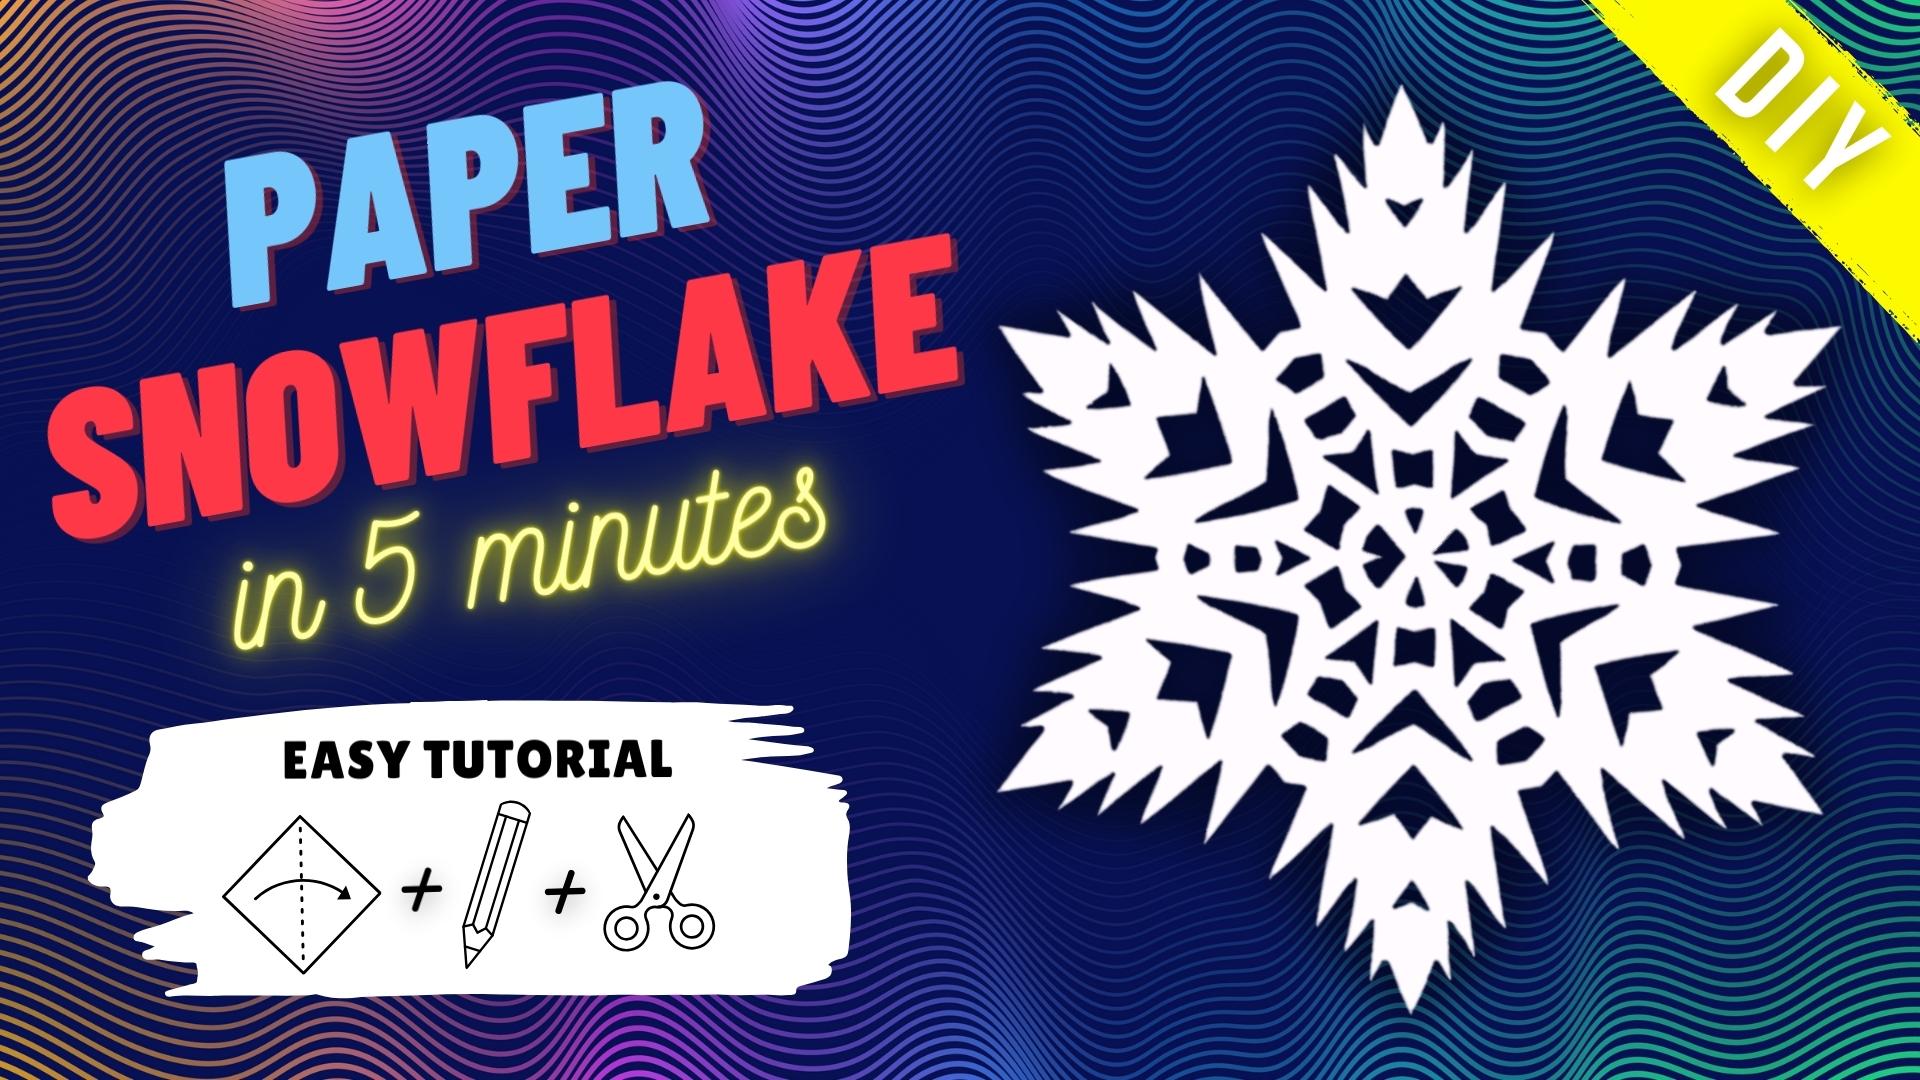 Snowflakes Crafts for Kids: Arts and Crafts Projects to Make Snow flakes  with Paper Cutting Instructions for Children & Preschoolers